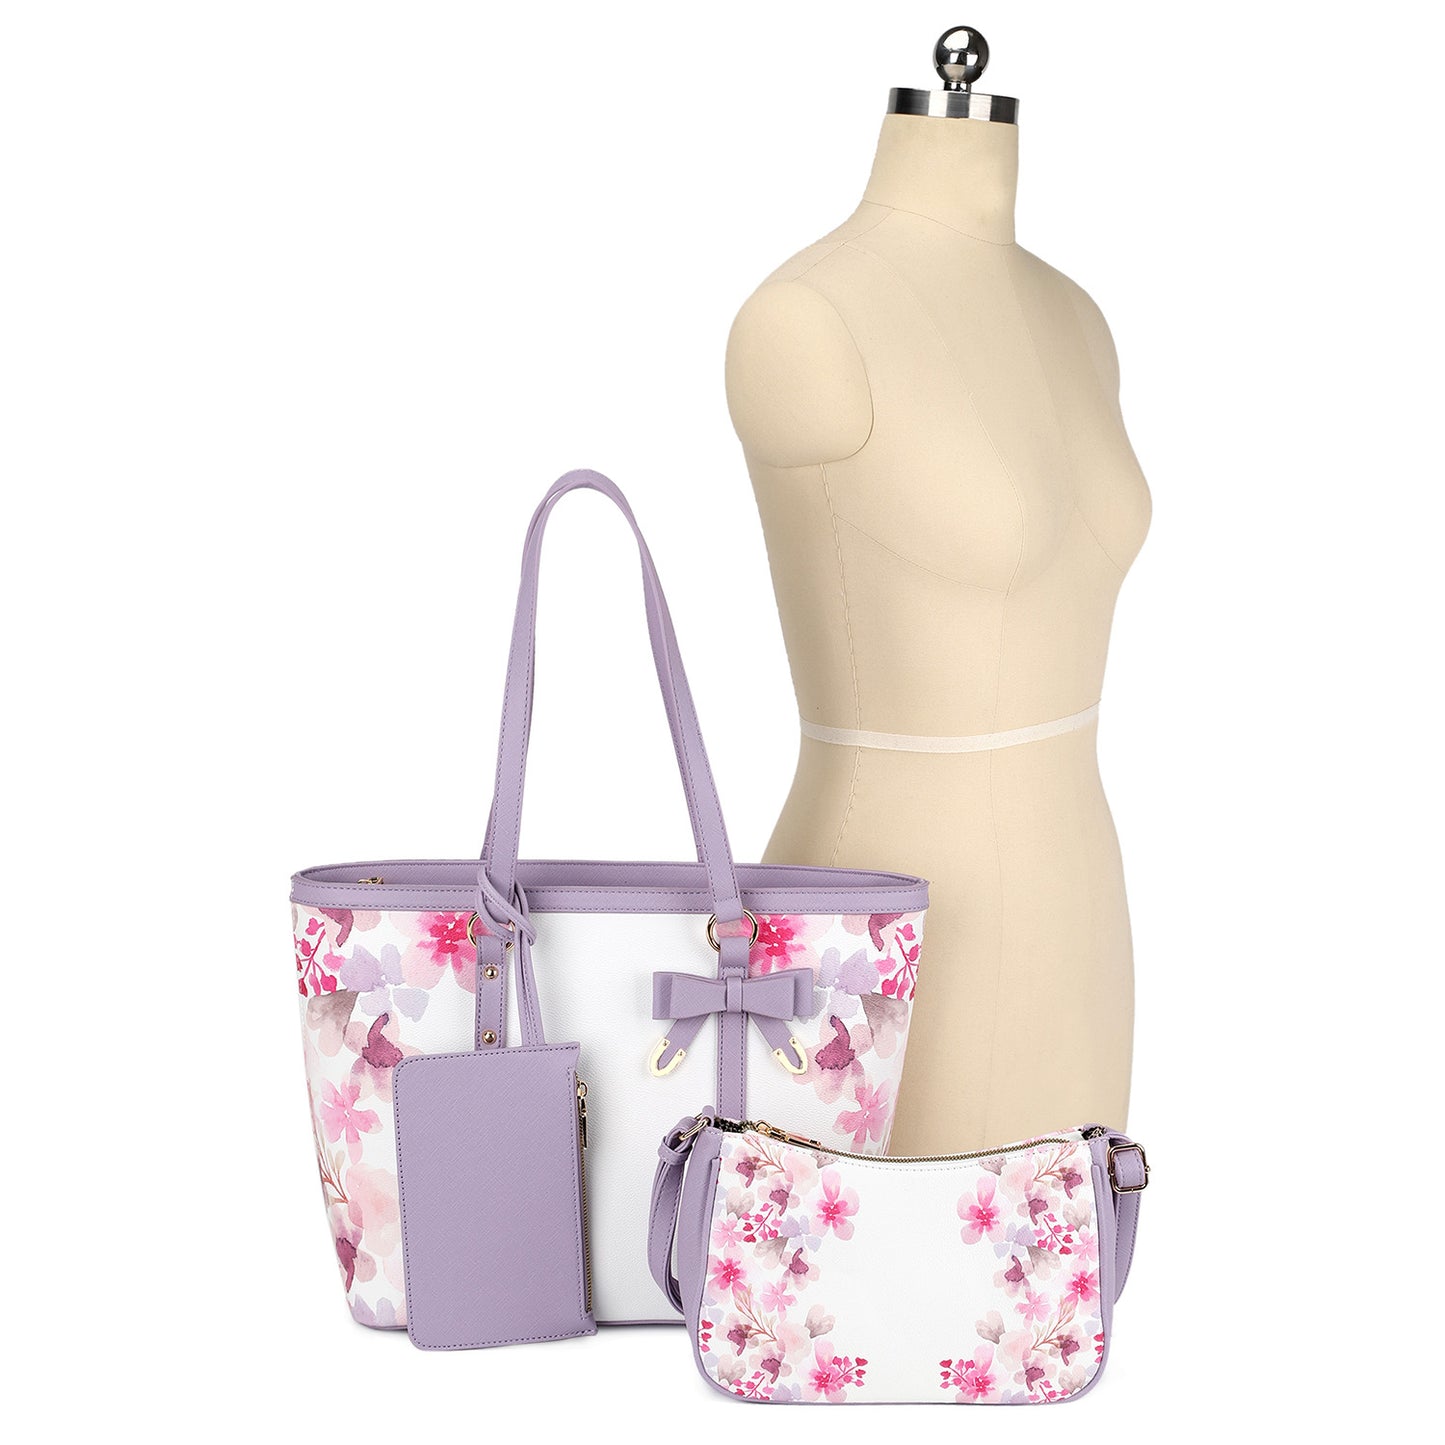 Lilac flower print tote and wallet